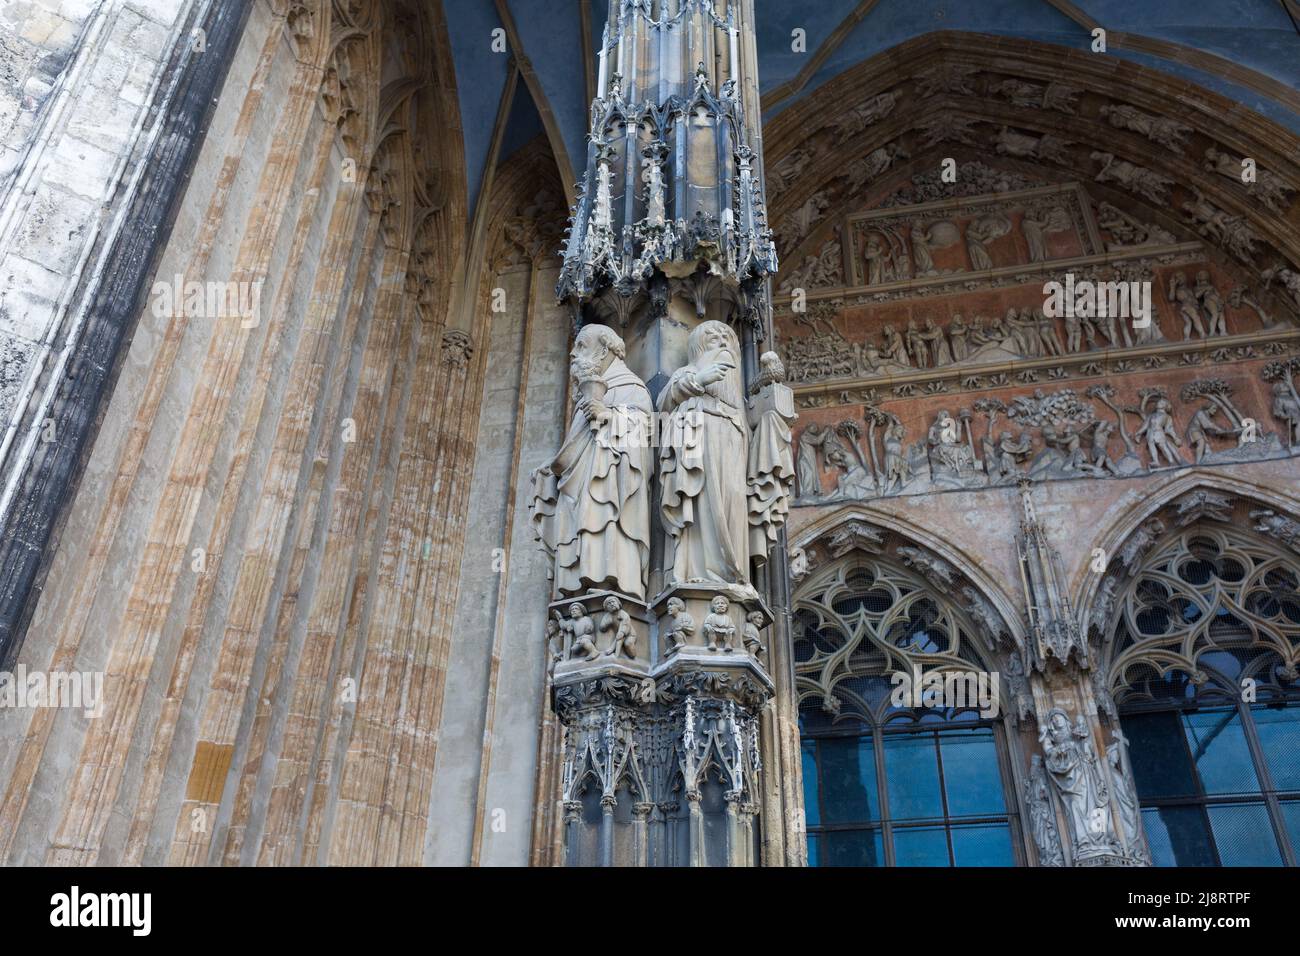 Ulm, Germany - Aug 8, 2021: View on the sculptures at the left hand side of the main portal of Ulm Cathedral. Stock Photo